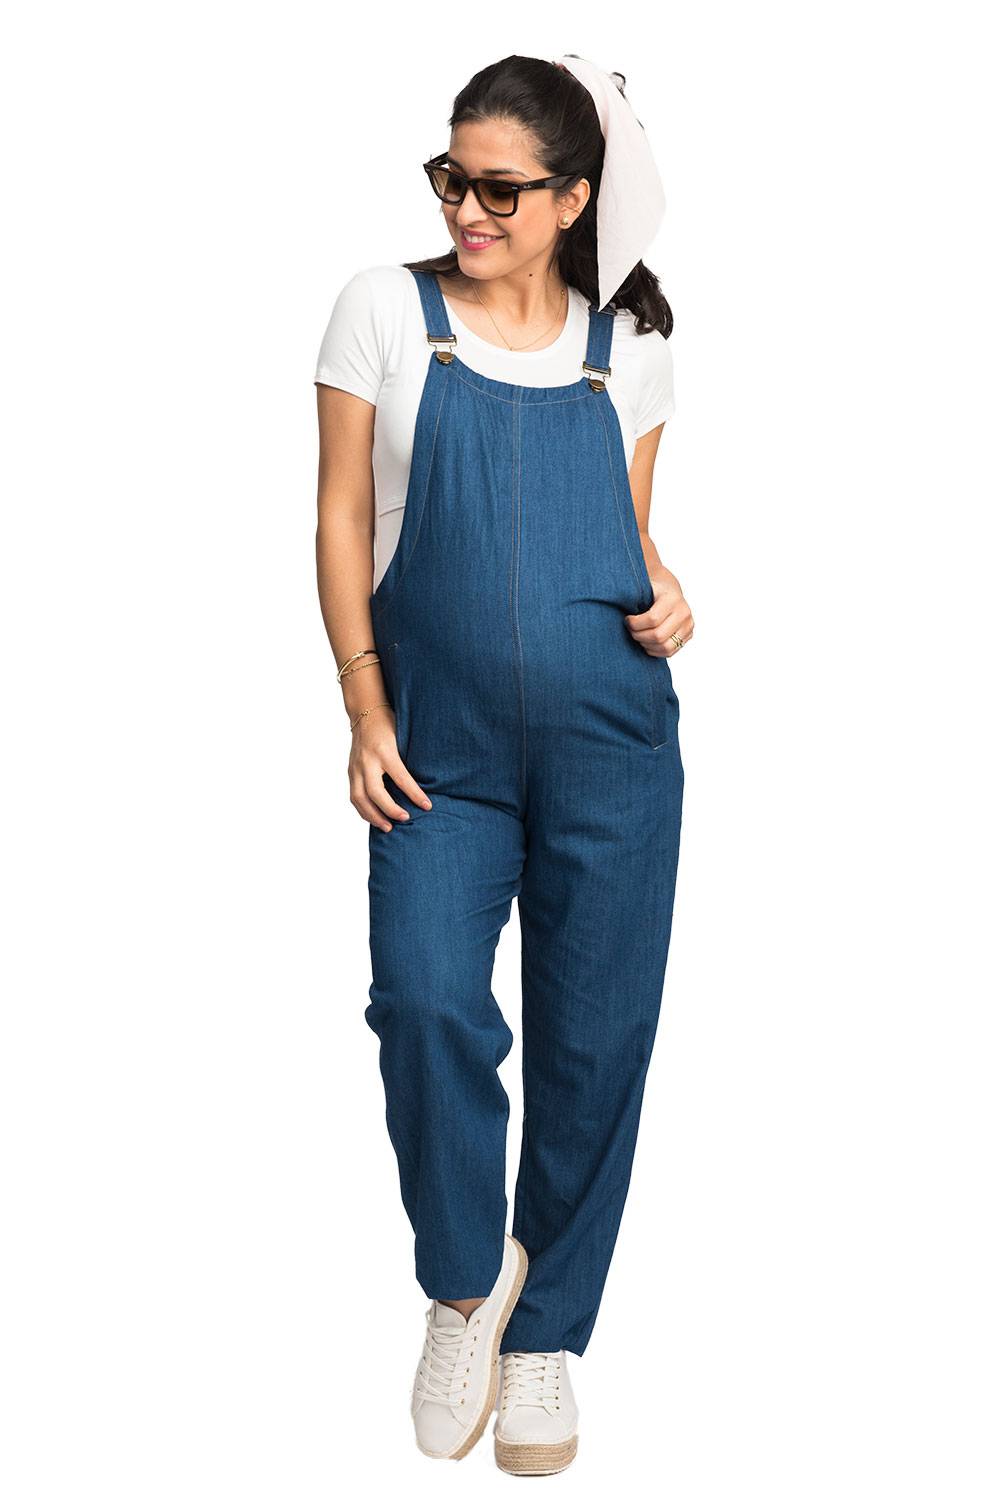 BUP MATERNITY - Overall Maternal Bup Maternity